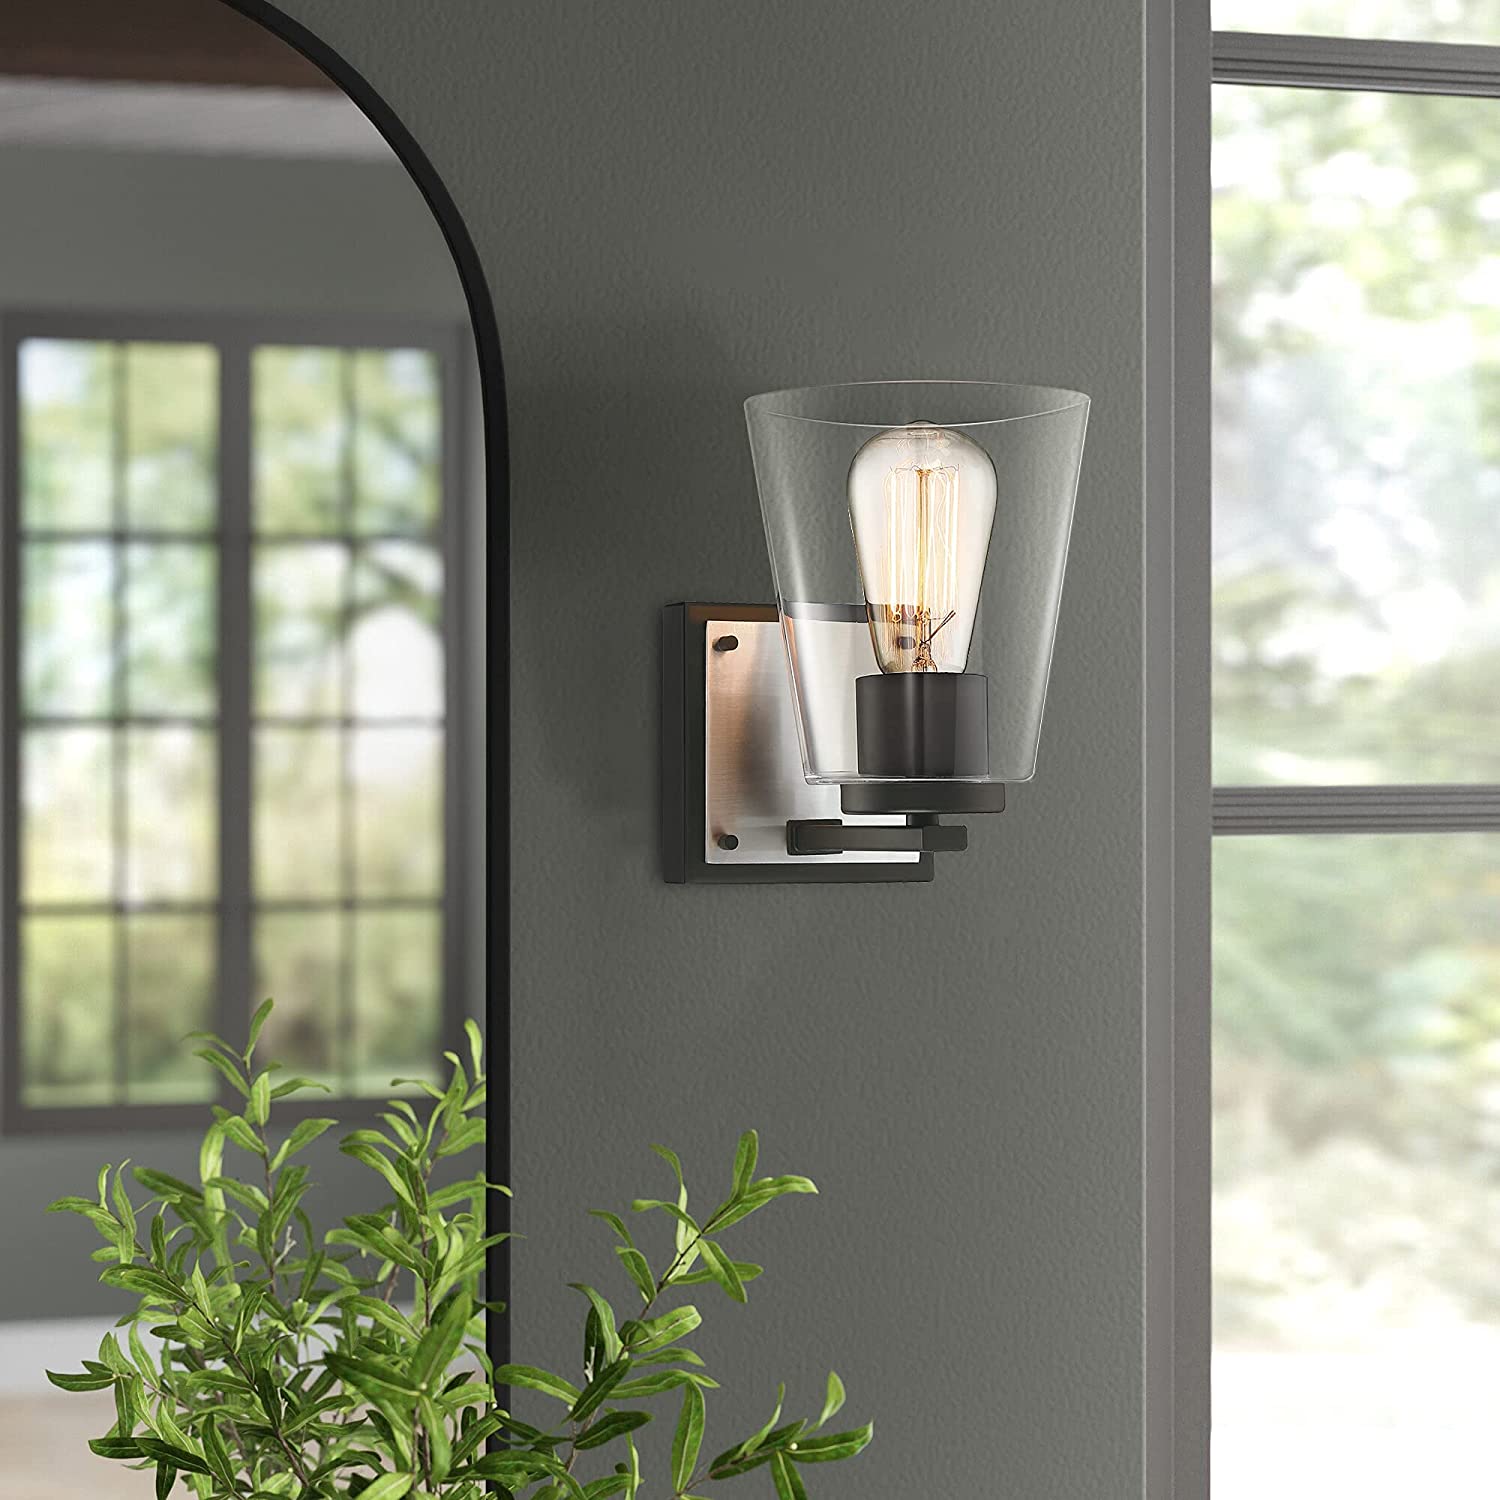 Modern wall mount light fixture indoor black glass wall sconce with nickel finish